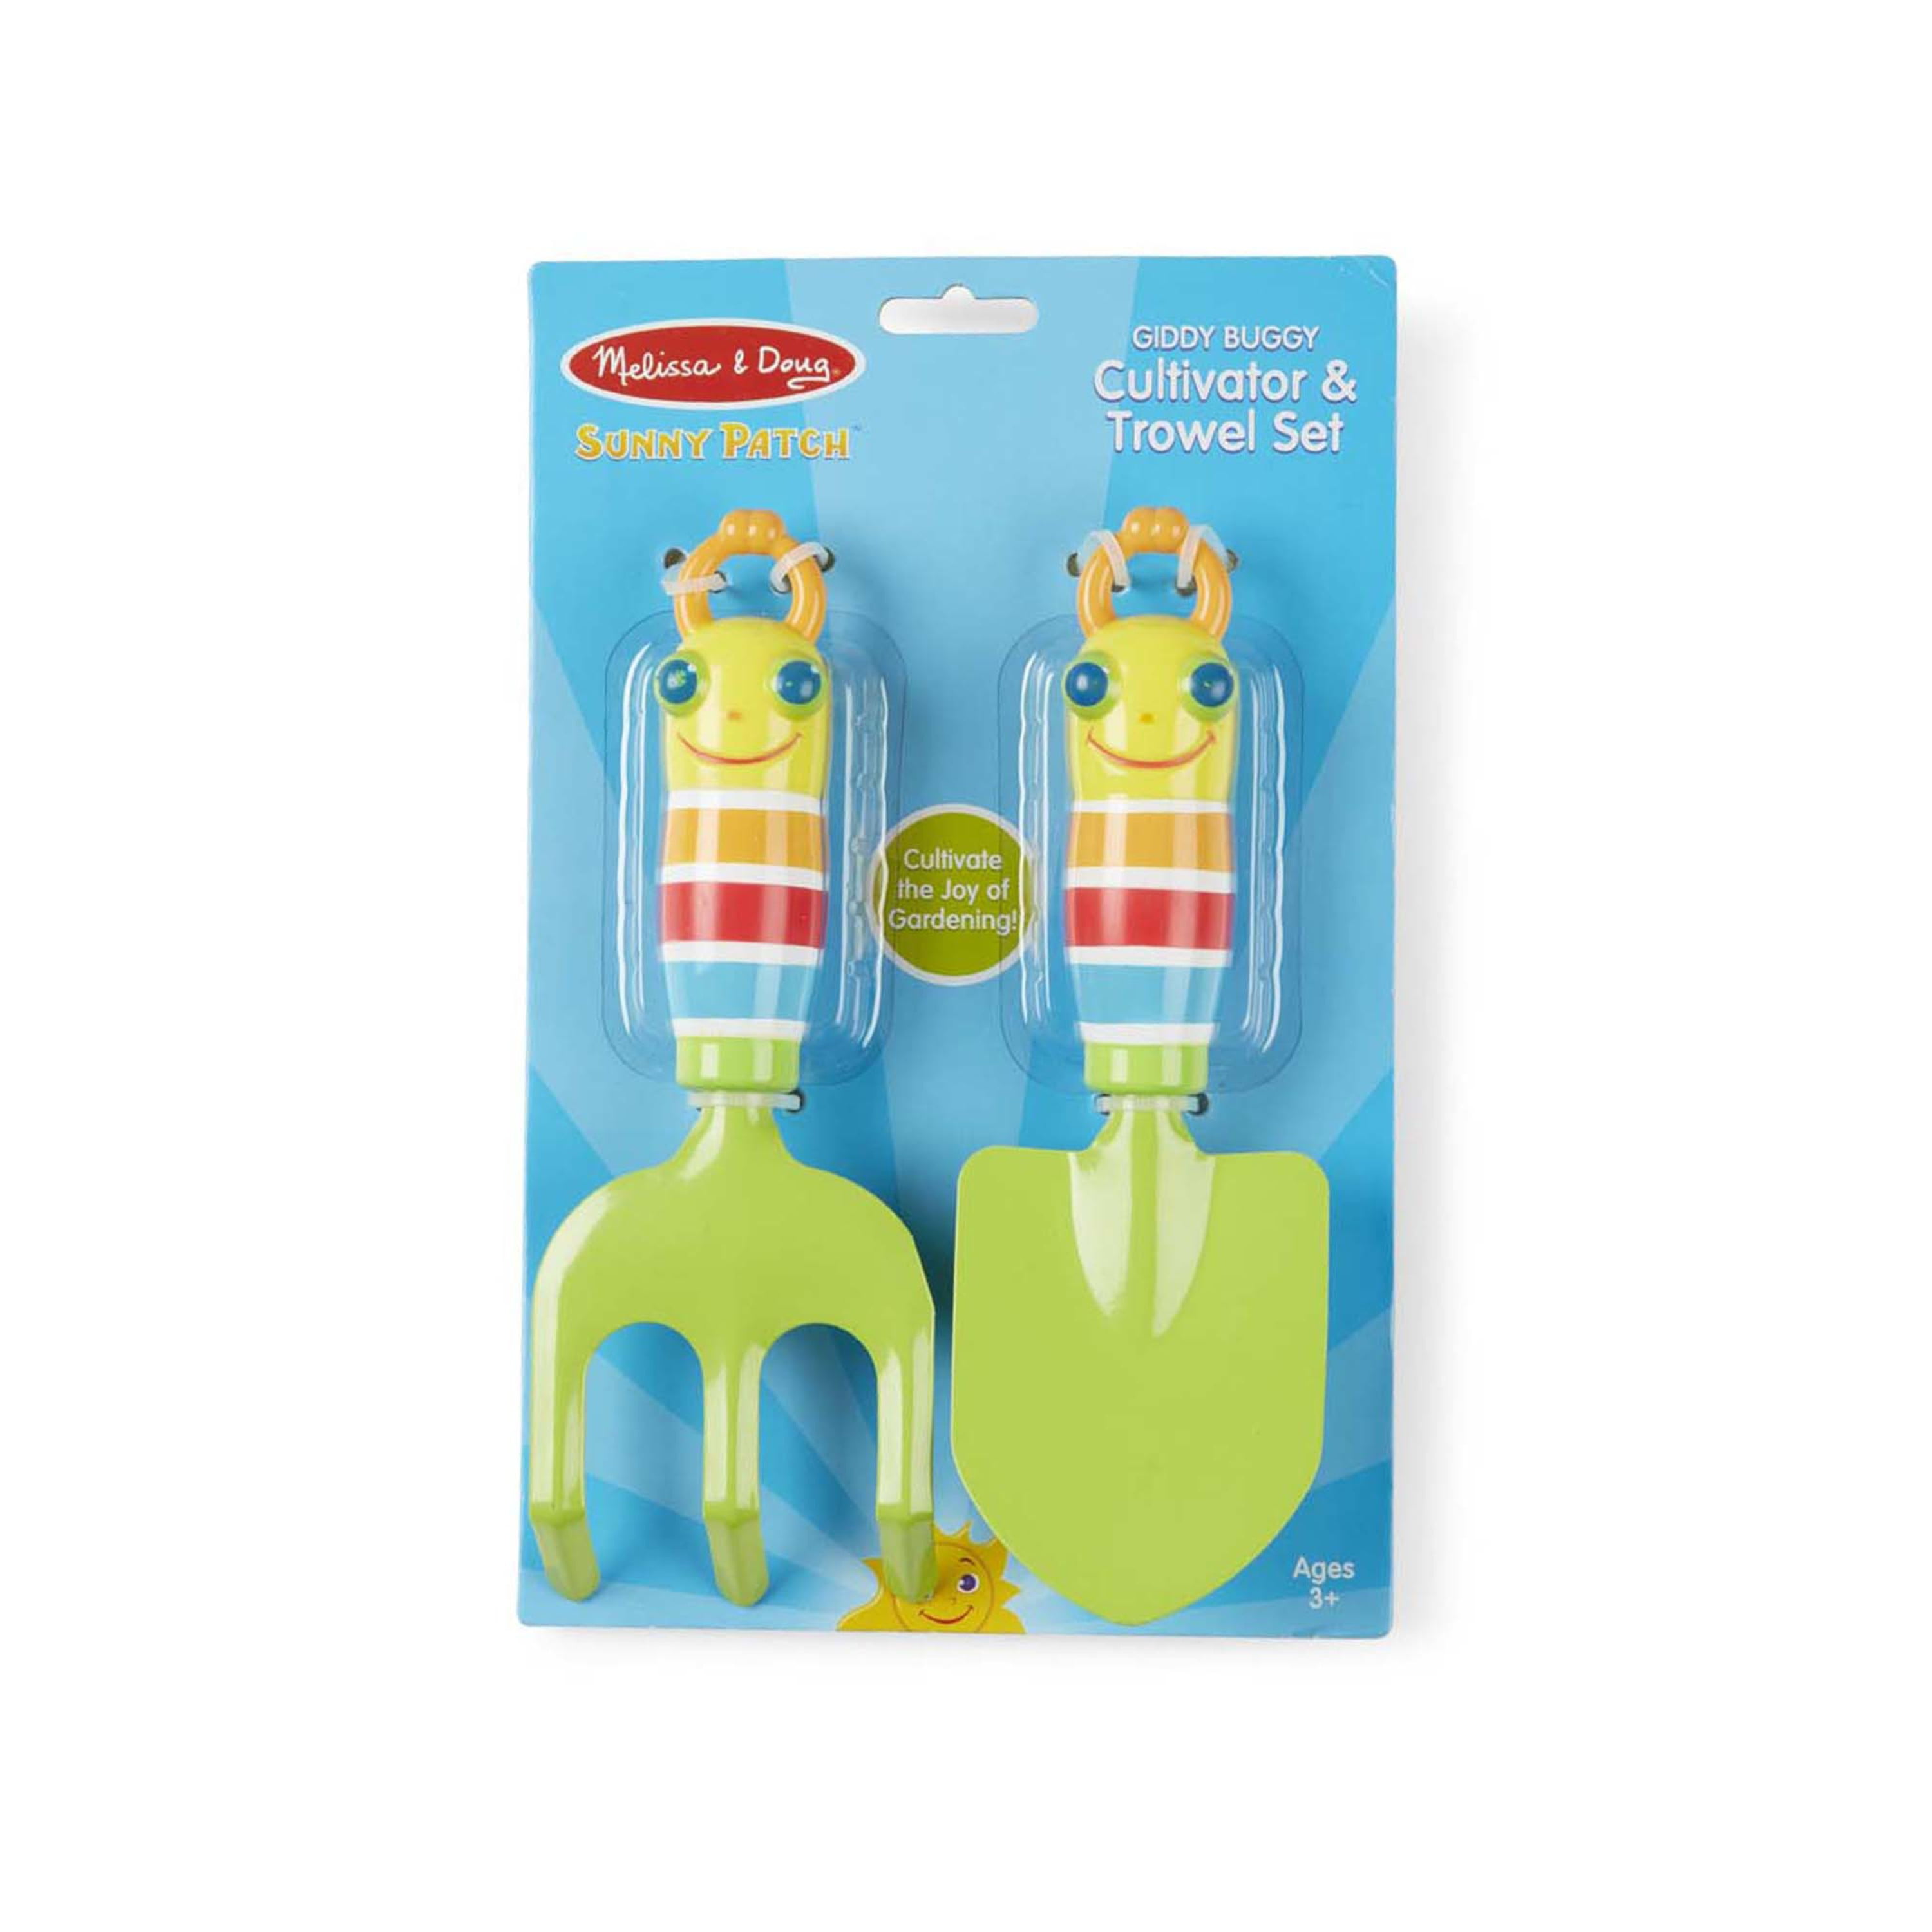 NEW Melissa & Doug Sunny Patch Giddy Buggy Cultivator & Trowel Set PH-4.6-9 